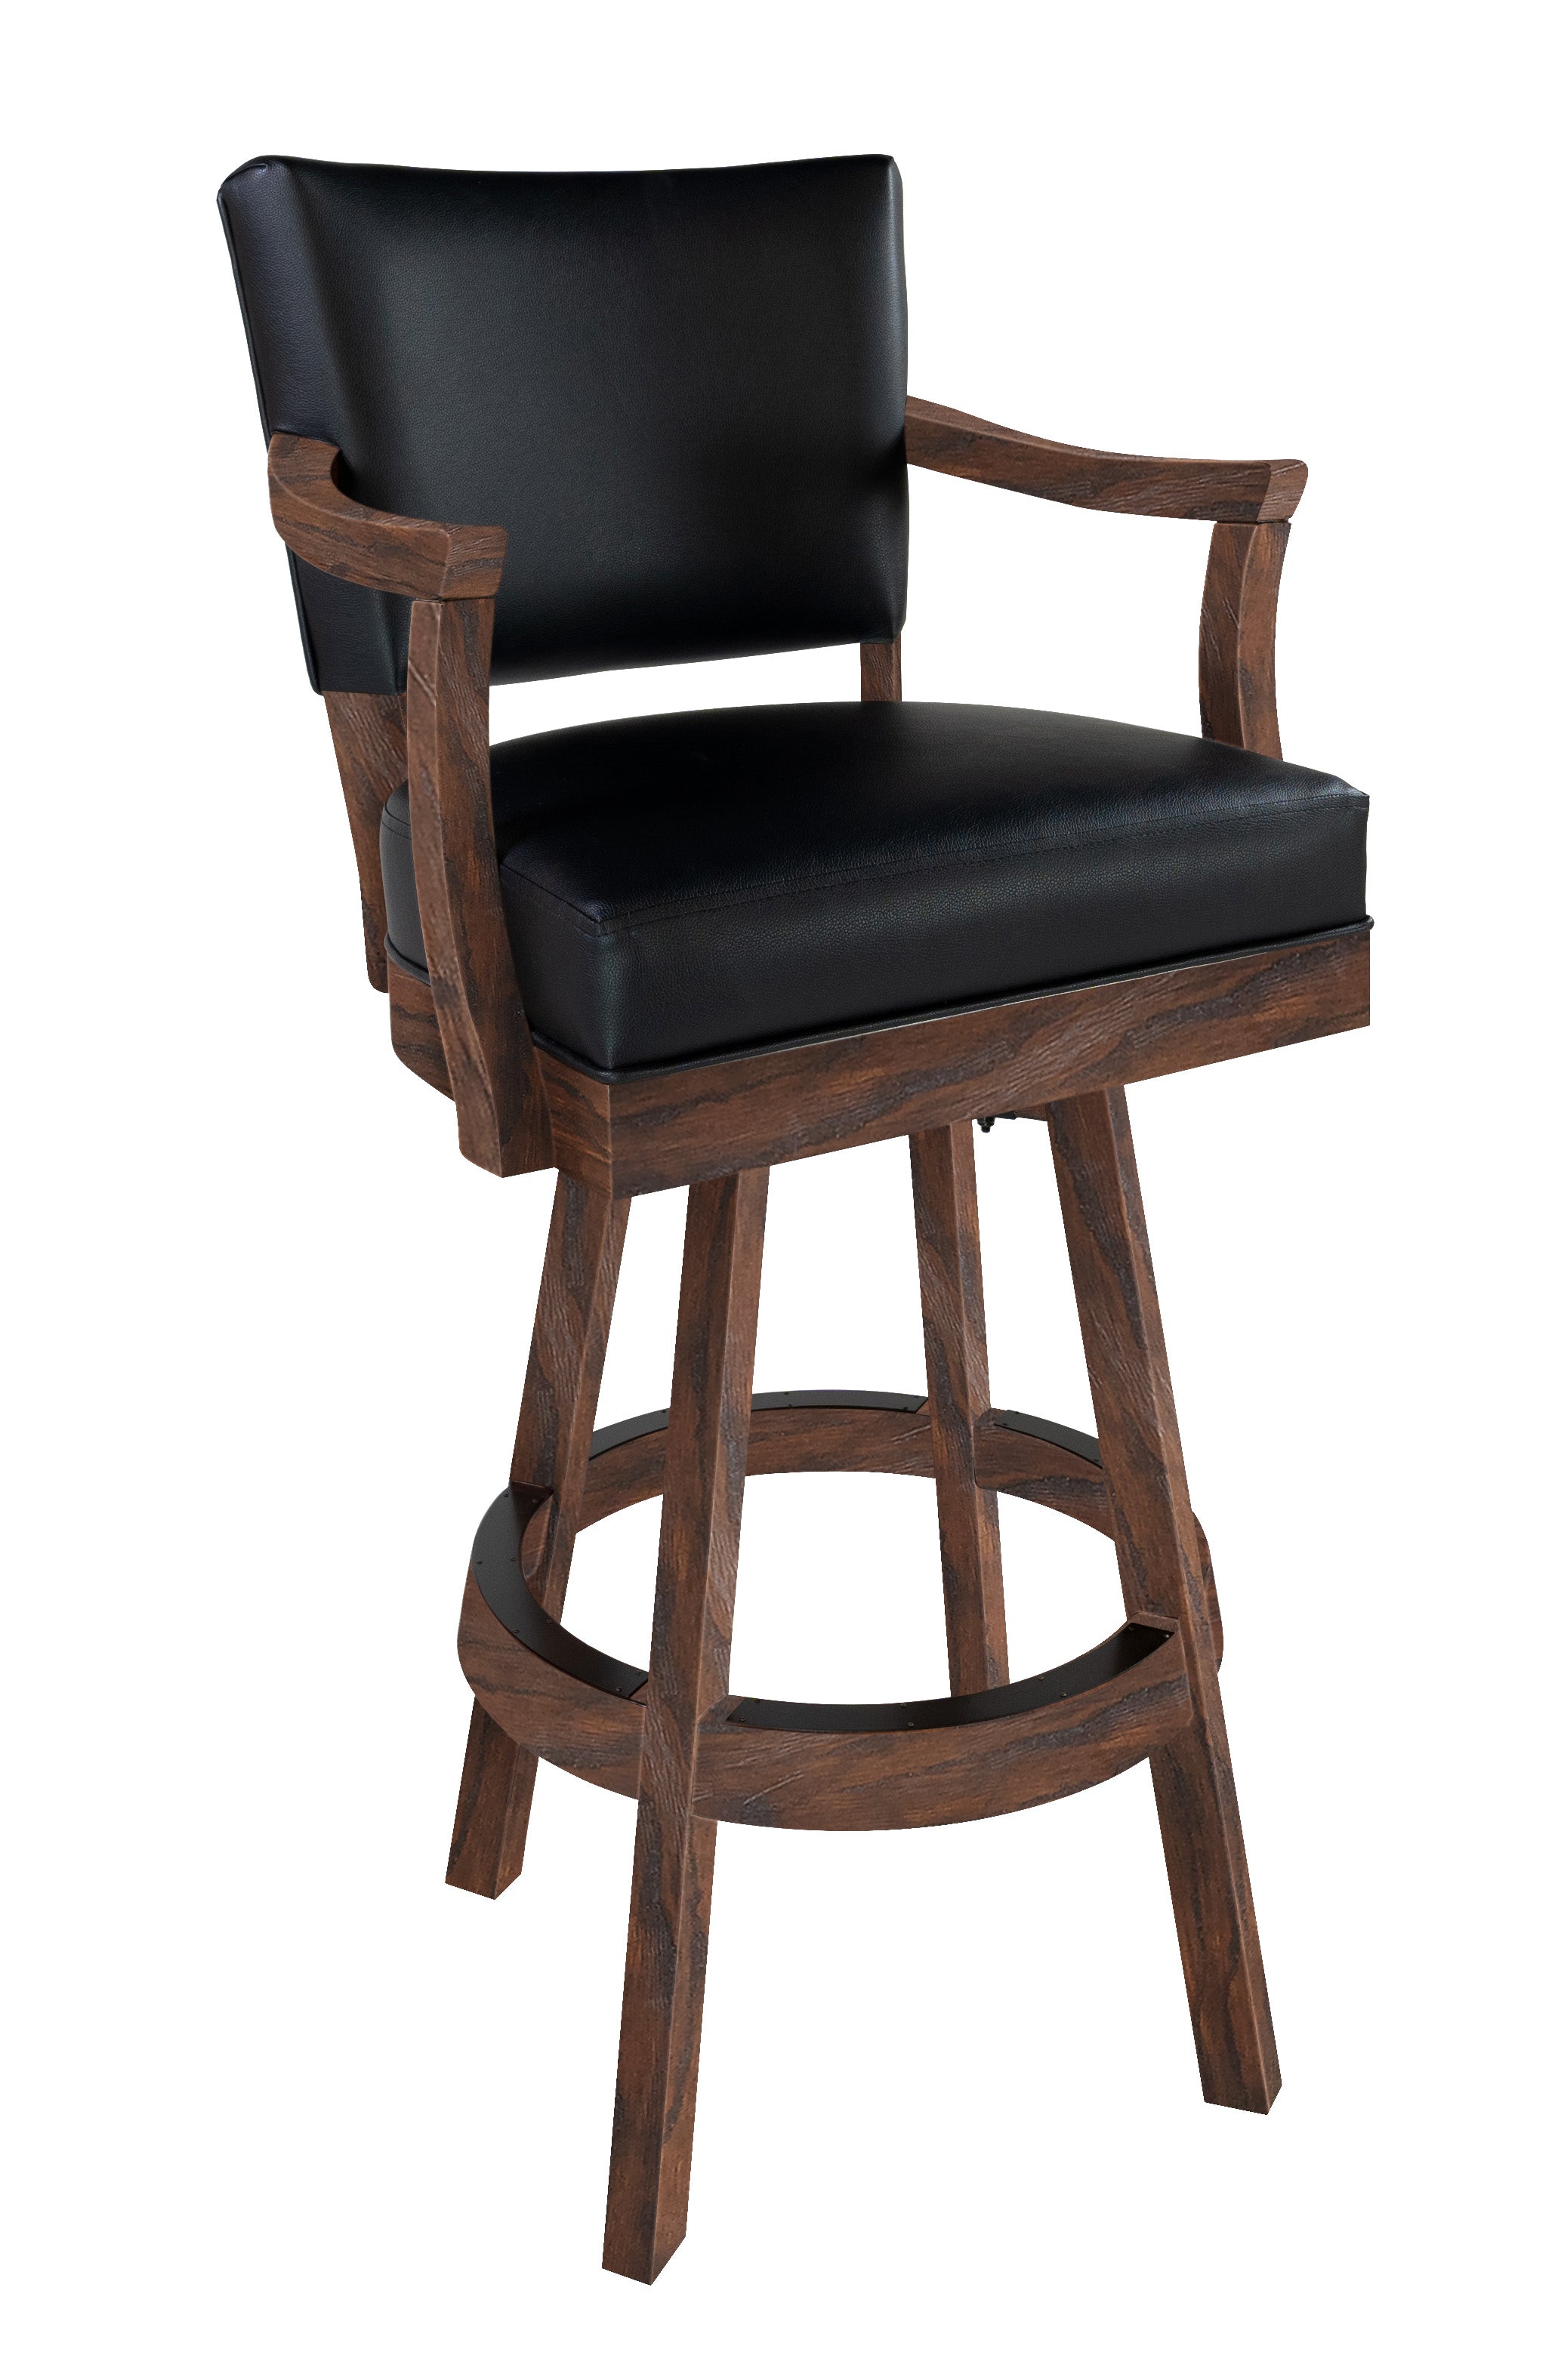 Legacy Billiards Classic Backed Barstool with Arms in Whiskey Barrel Finish 